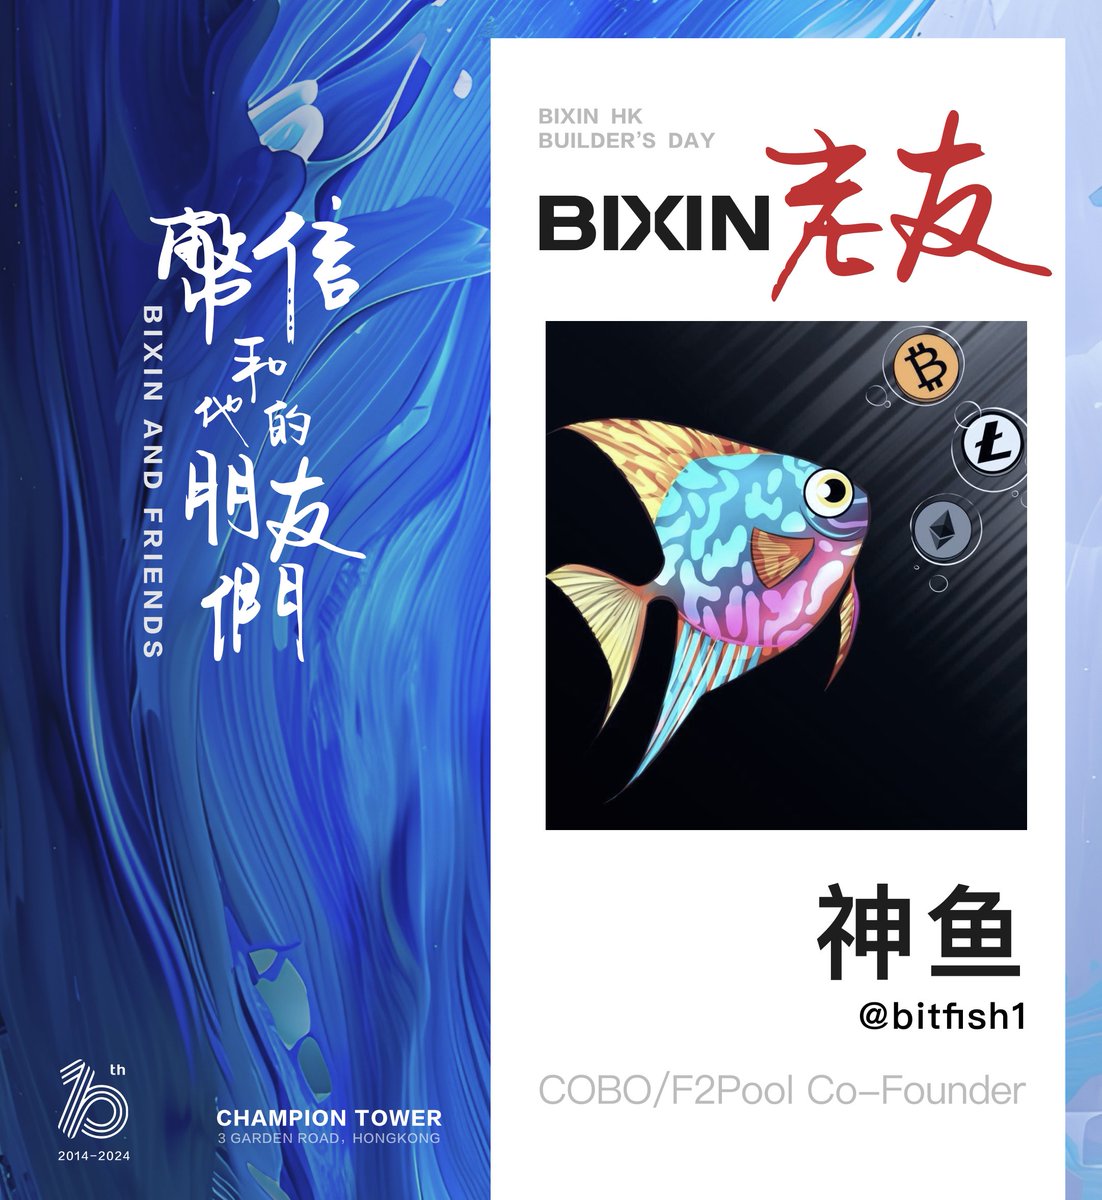 🍀 #BixinHK 2024 Conference is just around the corner! 🎉Let's welcom Bitfish @bitfish1 joins #BixinHK 2024 as a special guest! ✨ As our decade-long companion, Bitfish not only is the co-founder of #F2pool and crypto wallet #Cobo, but also one of the most influential Chinese…